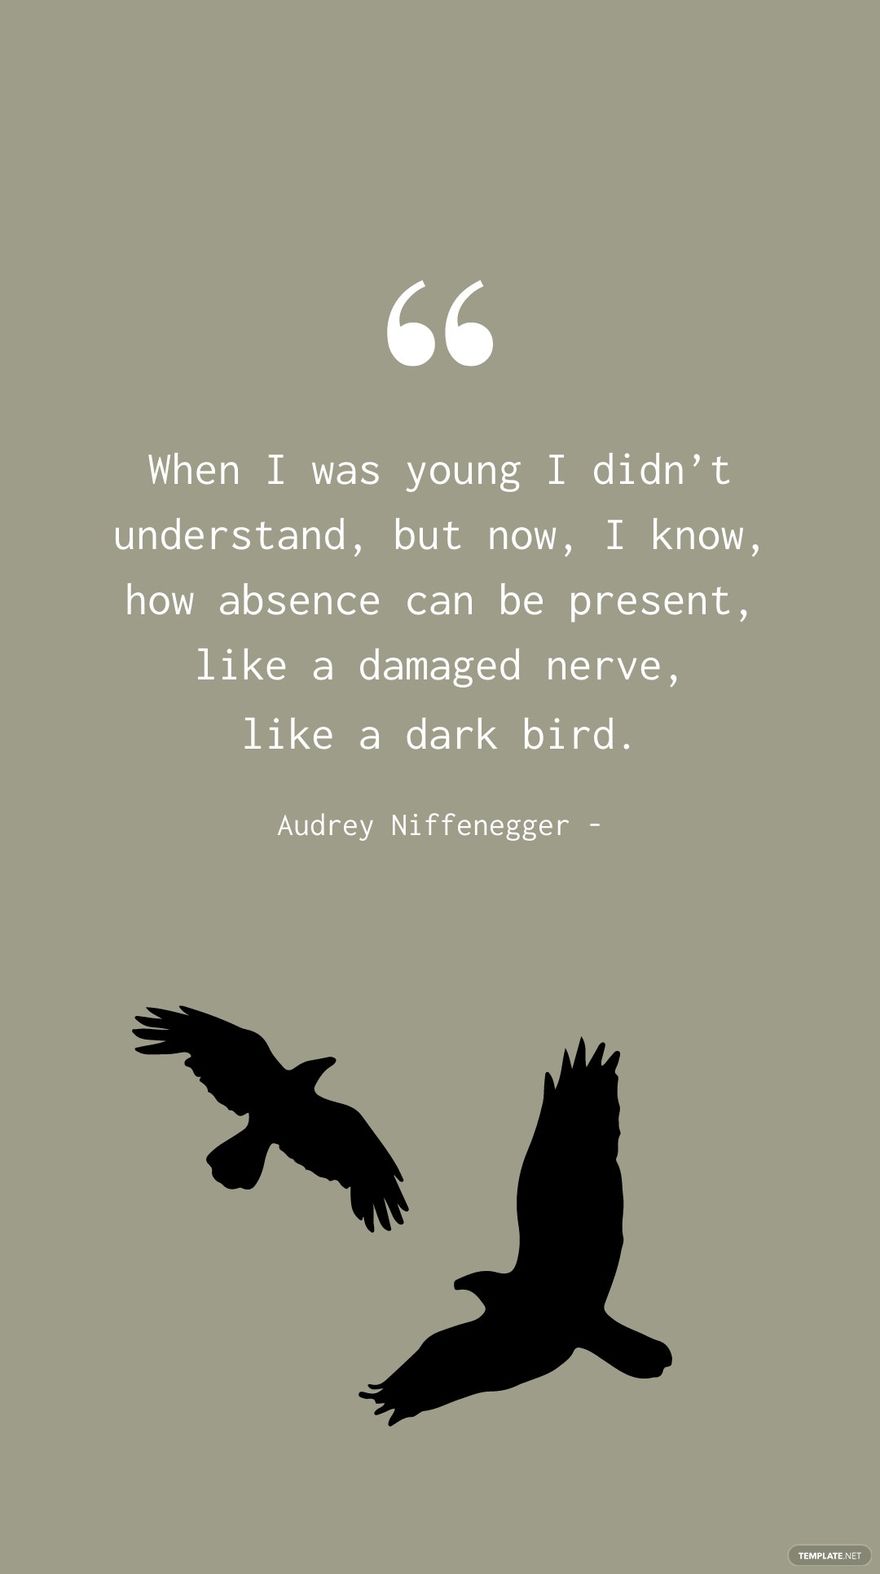 Free Audrey Niffenegger - When I was young I didn’t understand, but now, I know, how absence can be present, like a damaged nerve, like a dark bird.